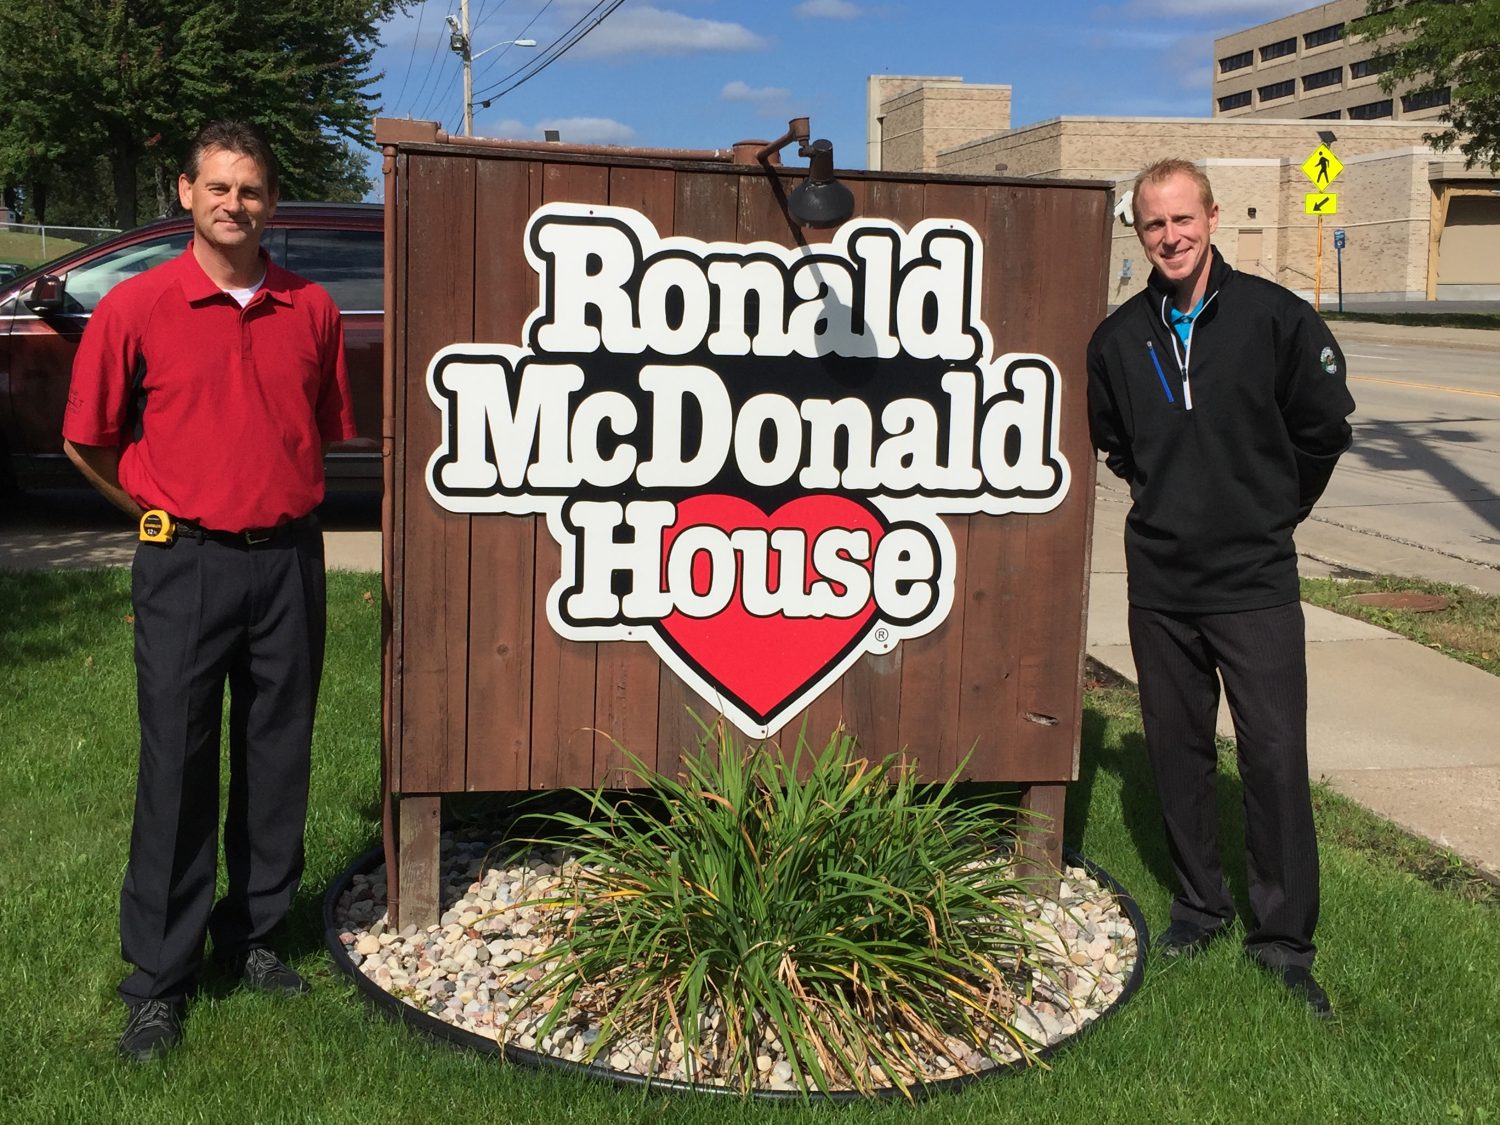 John Sikora (left) and C.W. Mitten IV (right) of Mittens Home Appliance made a special delivery to the Ronald McDonald House.